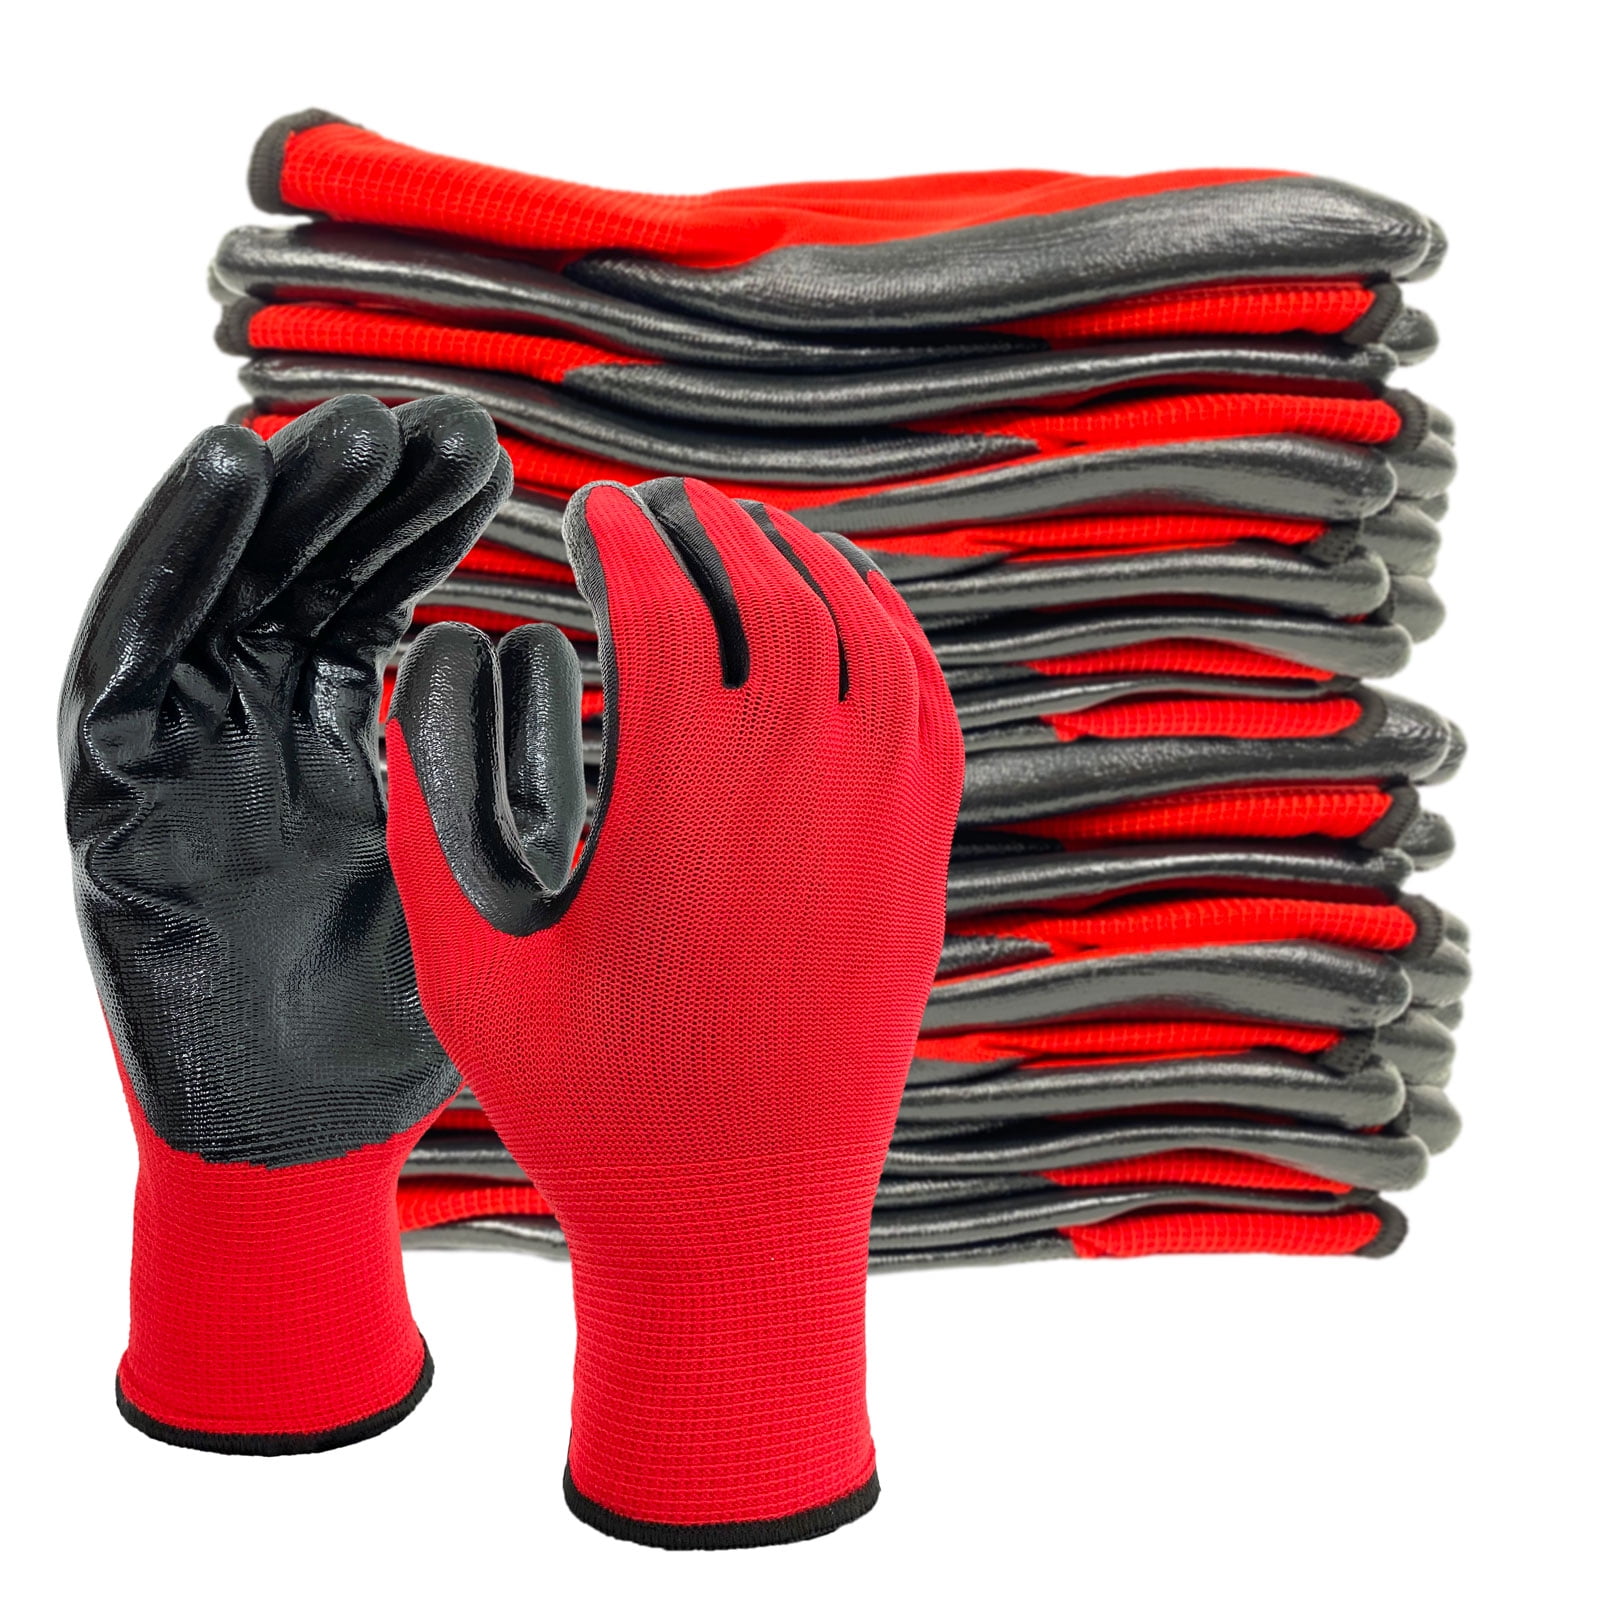 12 Pairs Fully Red PVC Coated Knit Wrist Rubber Gloves Safety Work Glove Size XL 